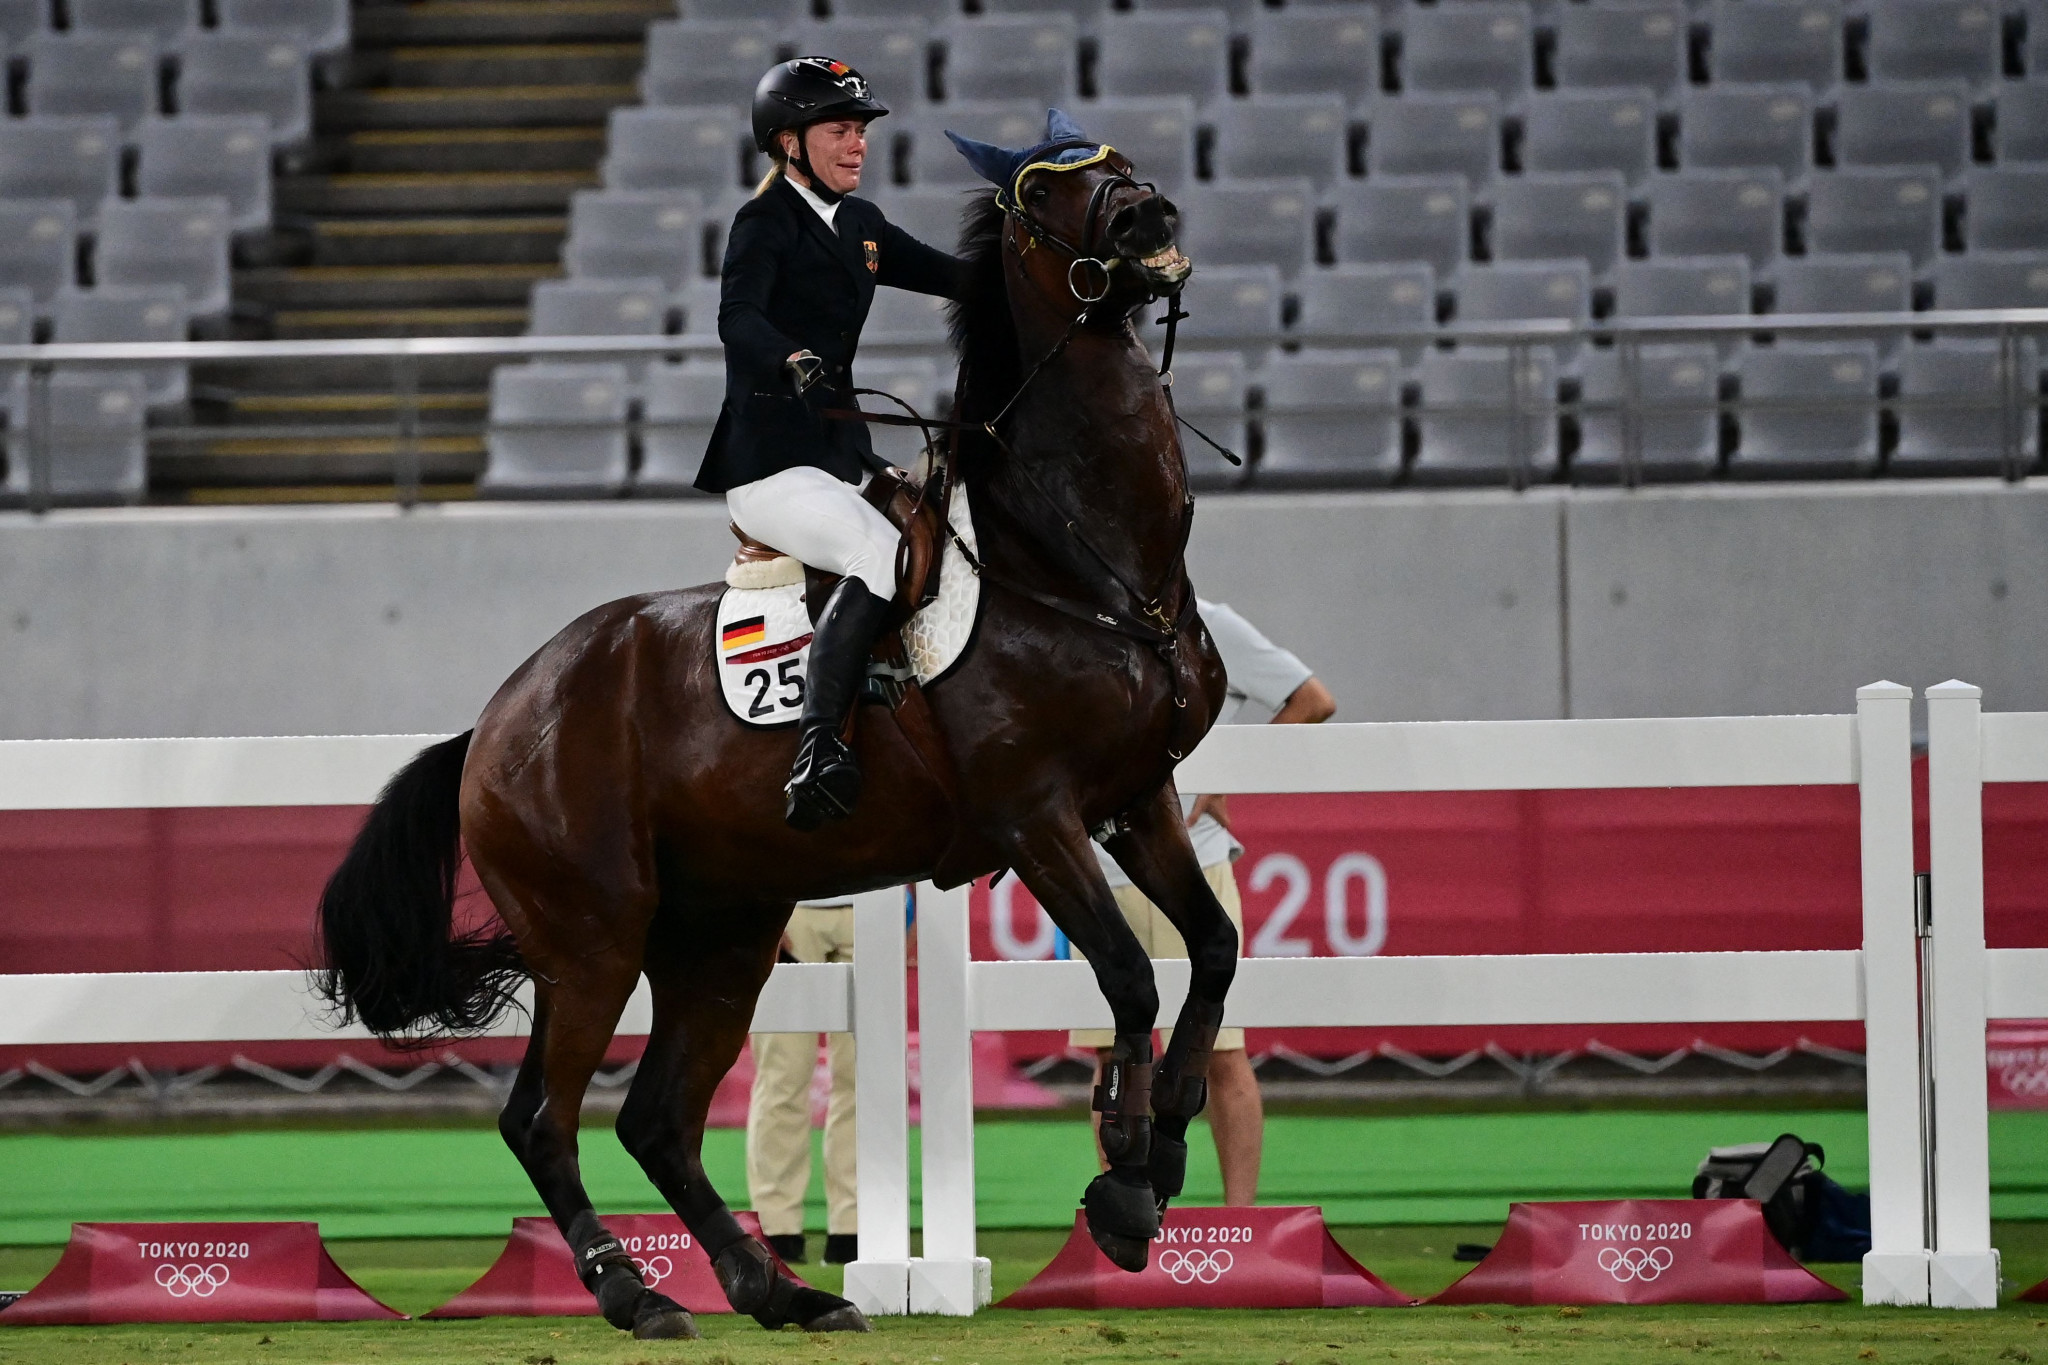 Annika Schleu's coach was thrown out of the Olympics after striking the horse Saint Boy during Tokyo 2020 ©Getty Images